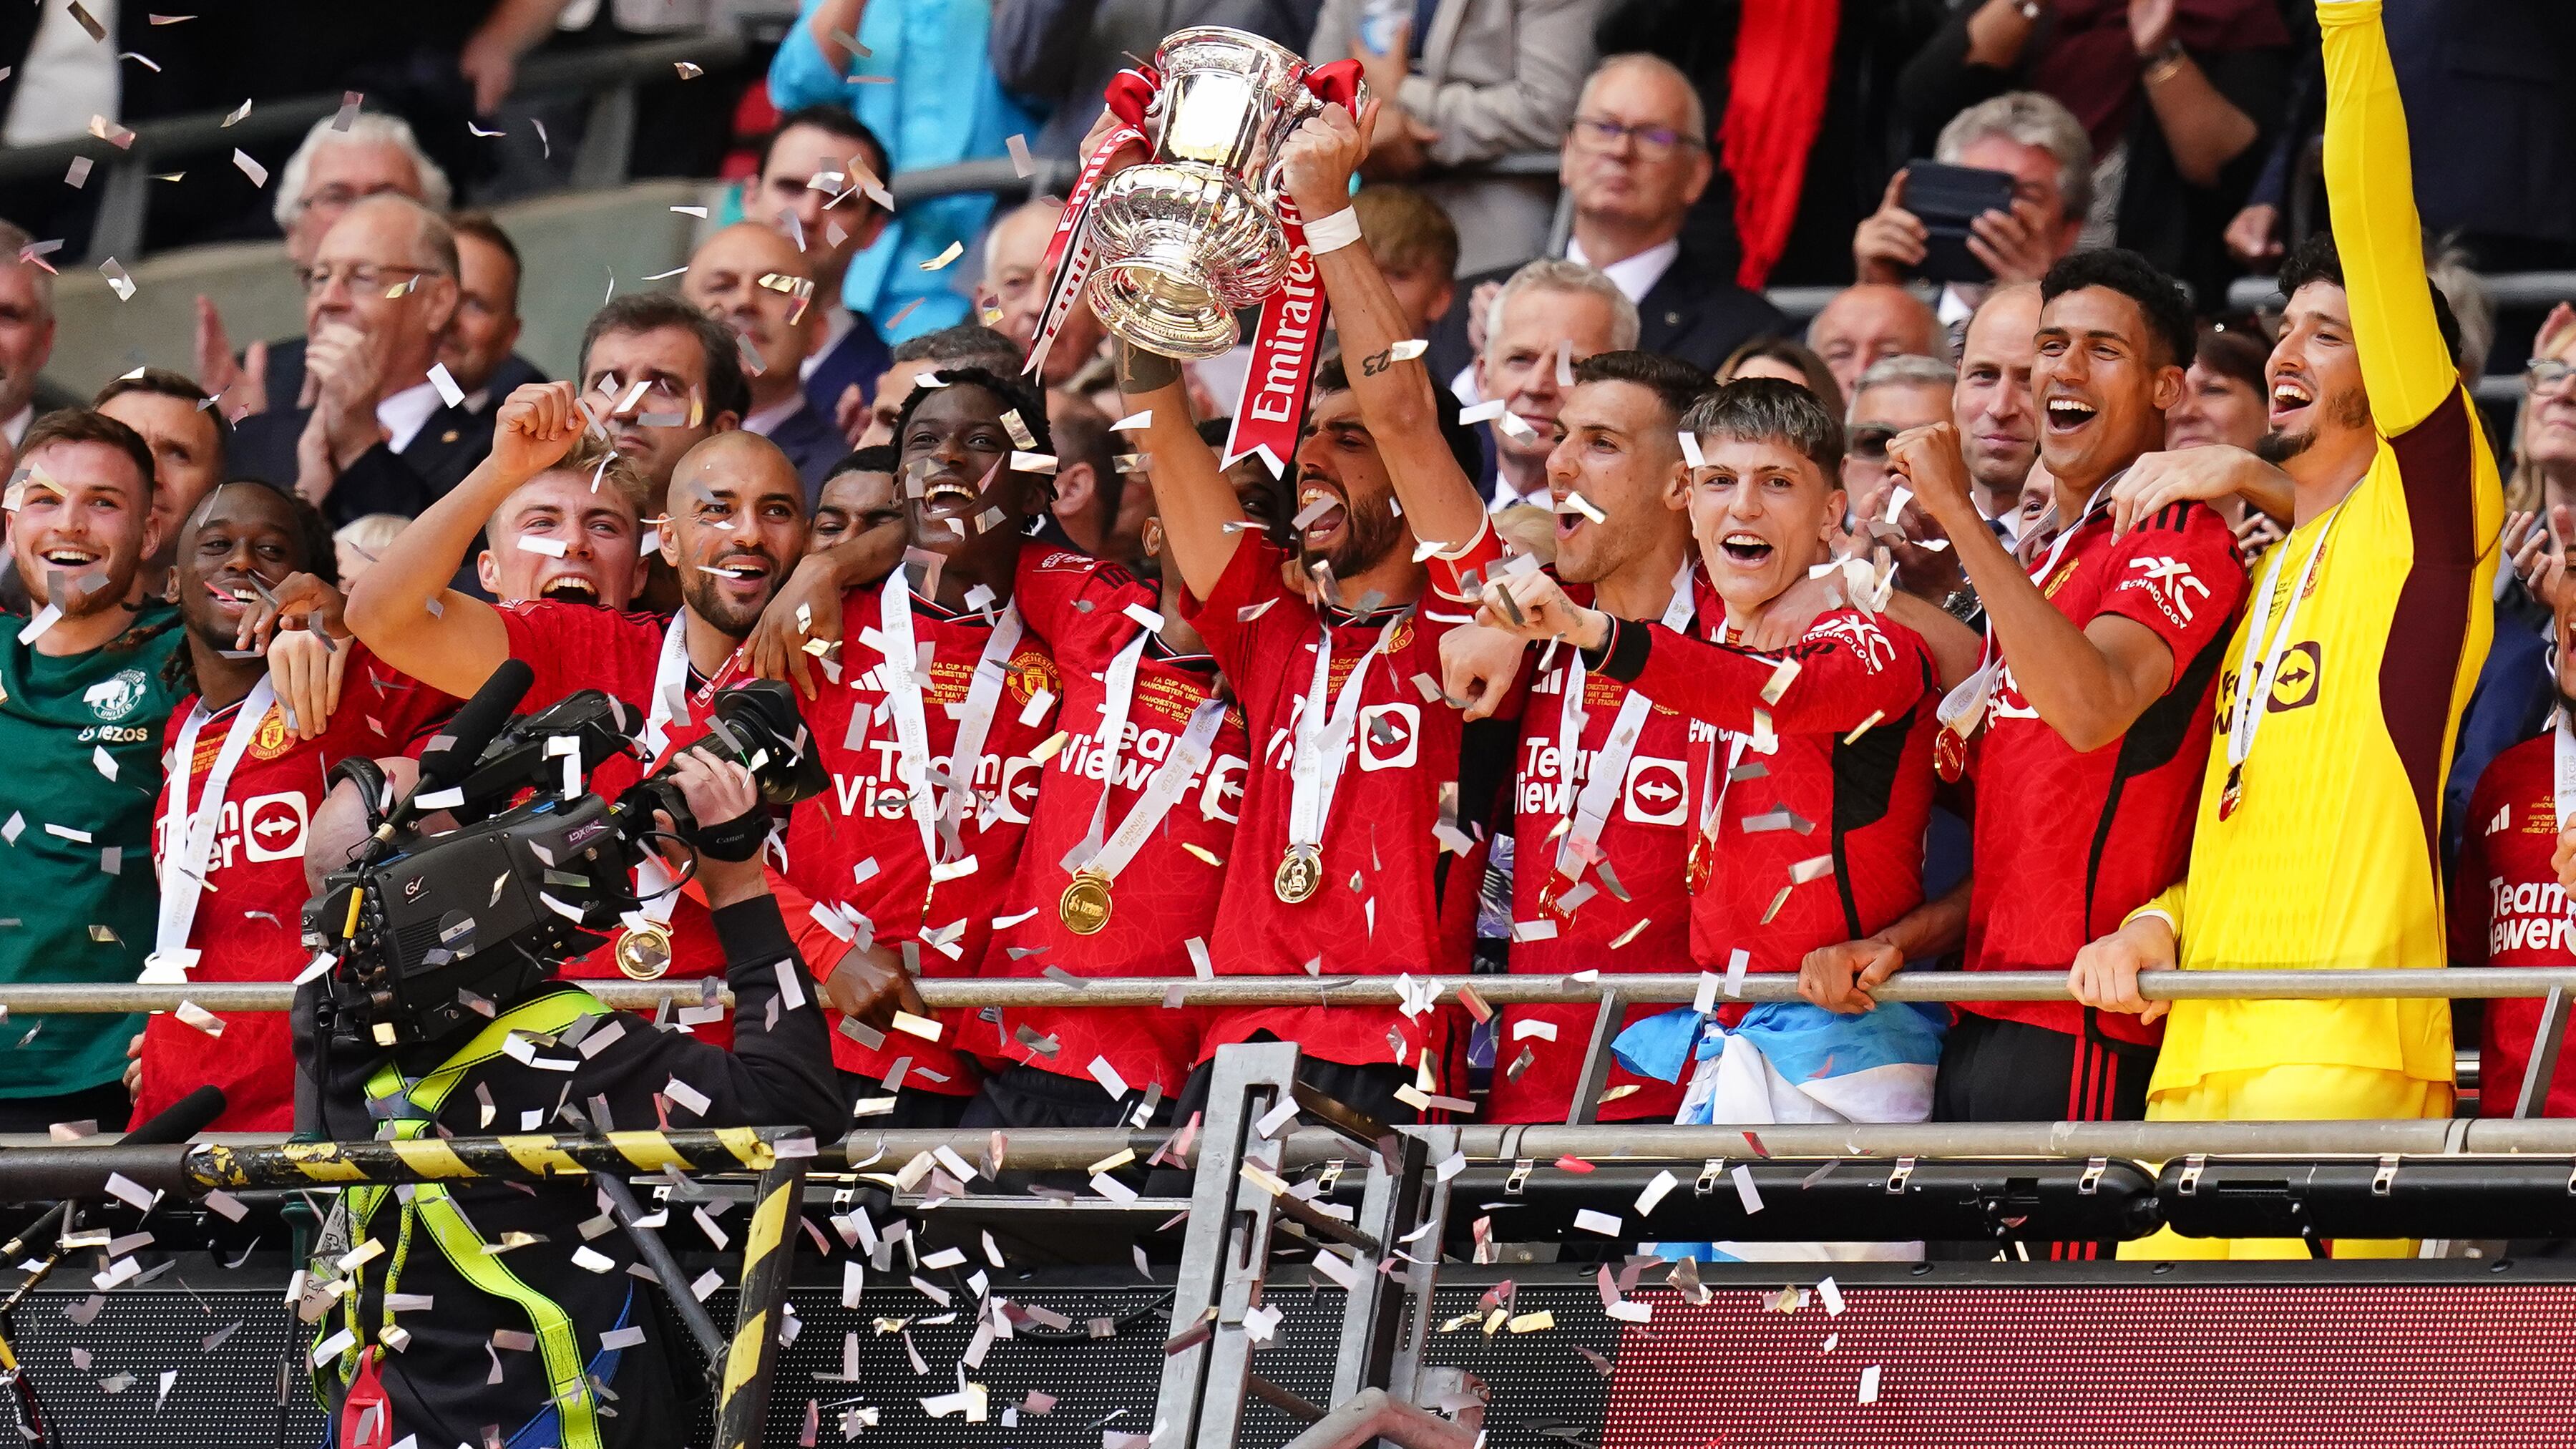 Manchester United players have vowed to “achieve great things” in an open letter to fans